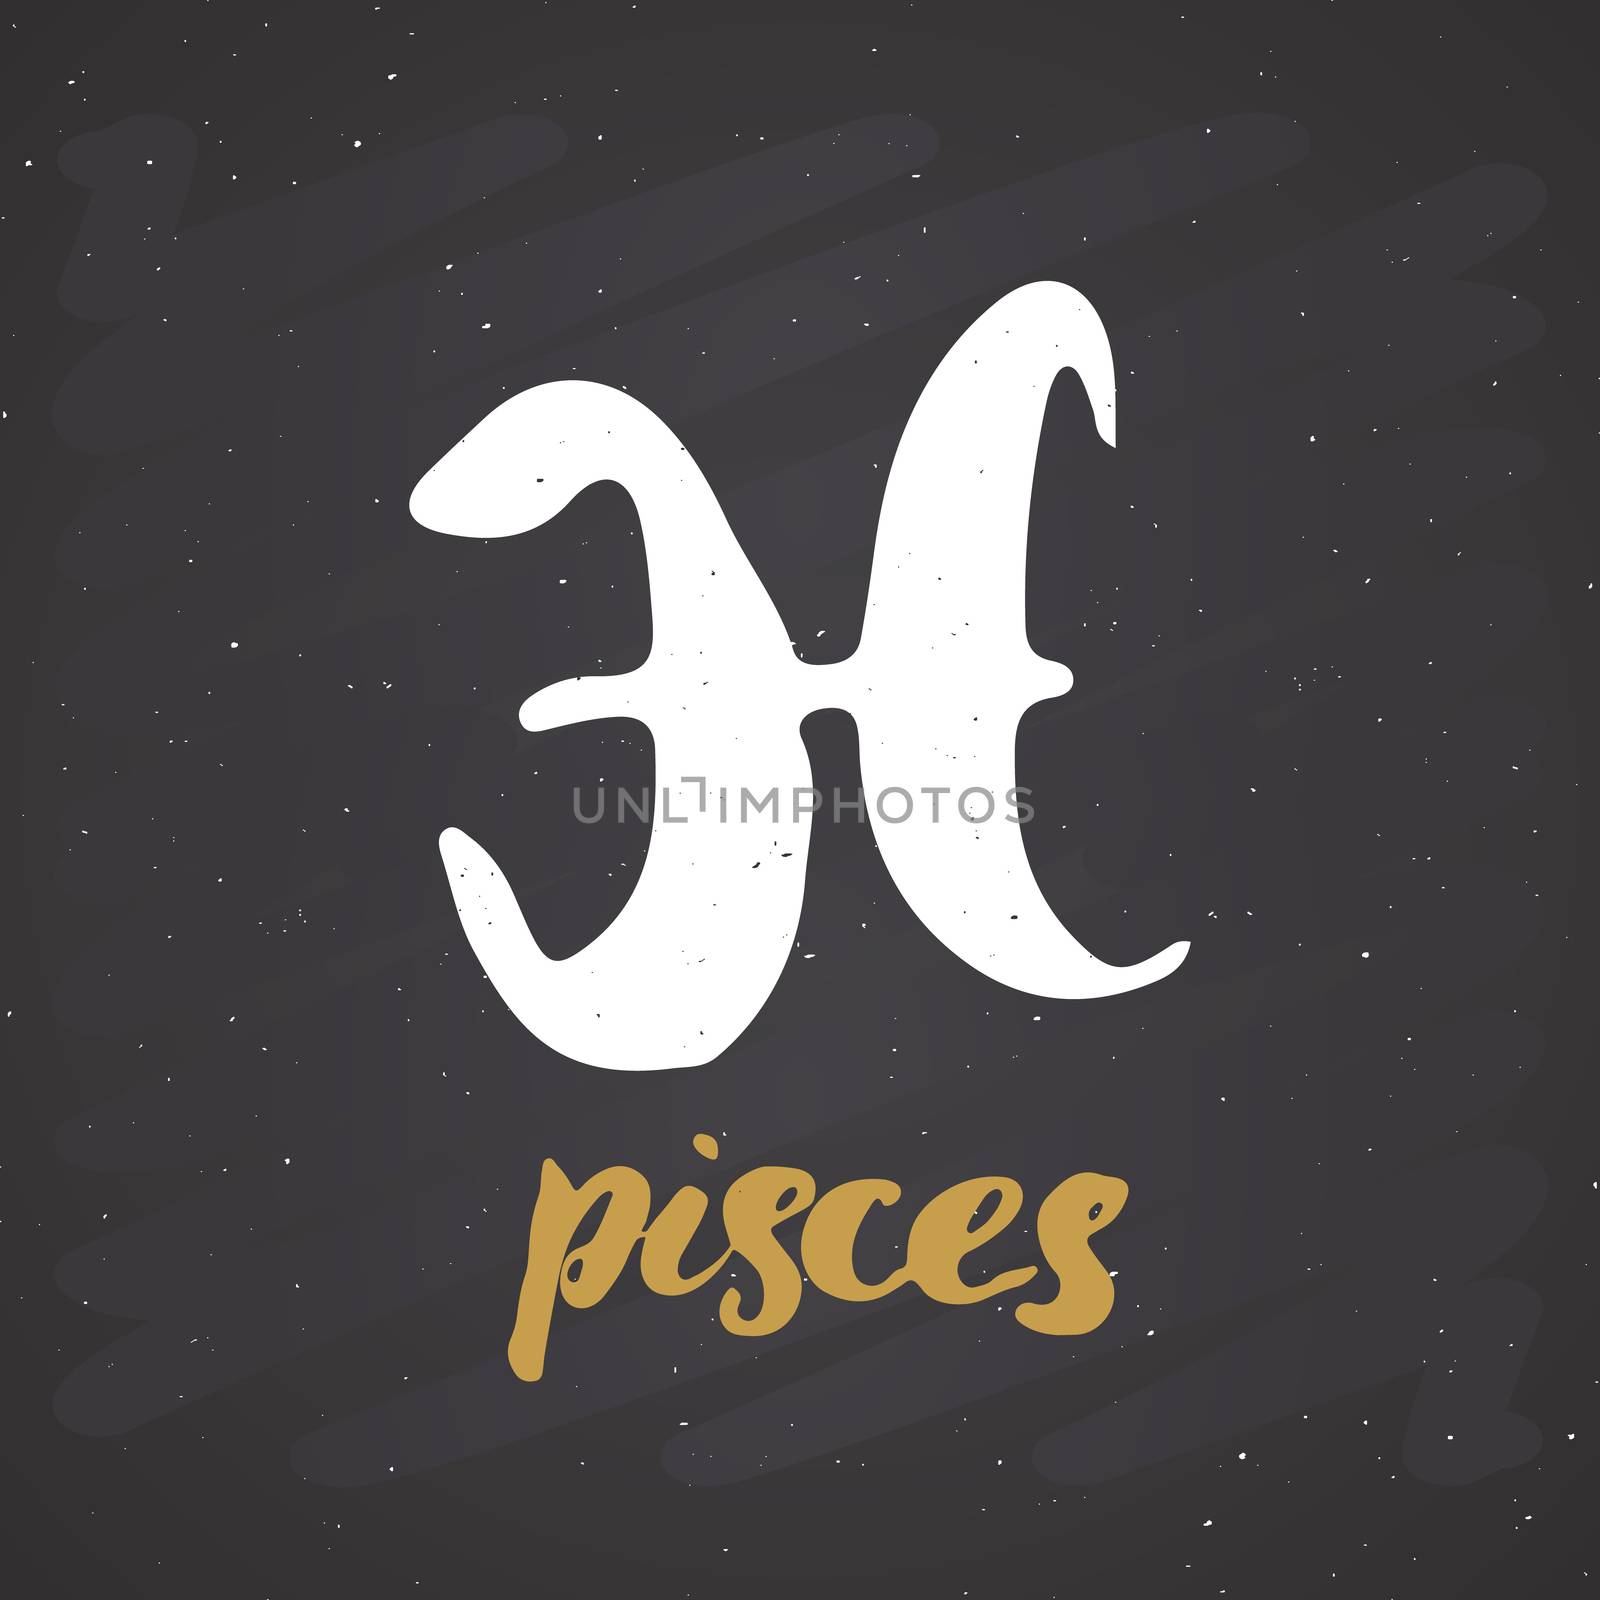 Zodiac sign Pisces and lettering. Hand drawn horoscope astrology symbol, grunge textured design, typography print, vector illustration on chalkboard background.